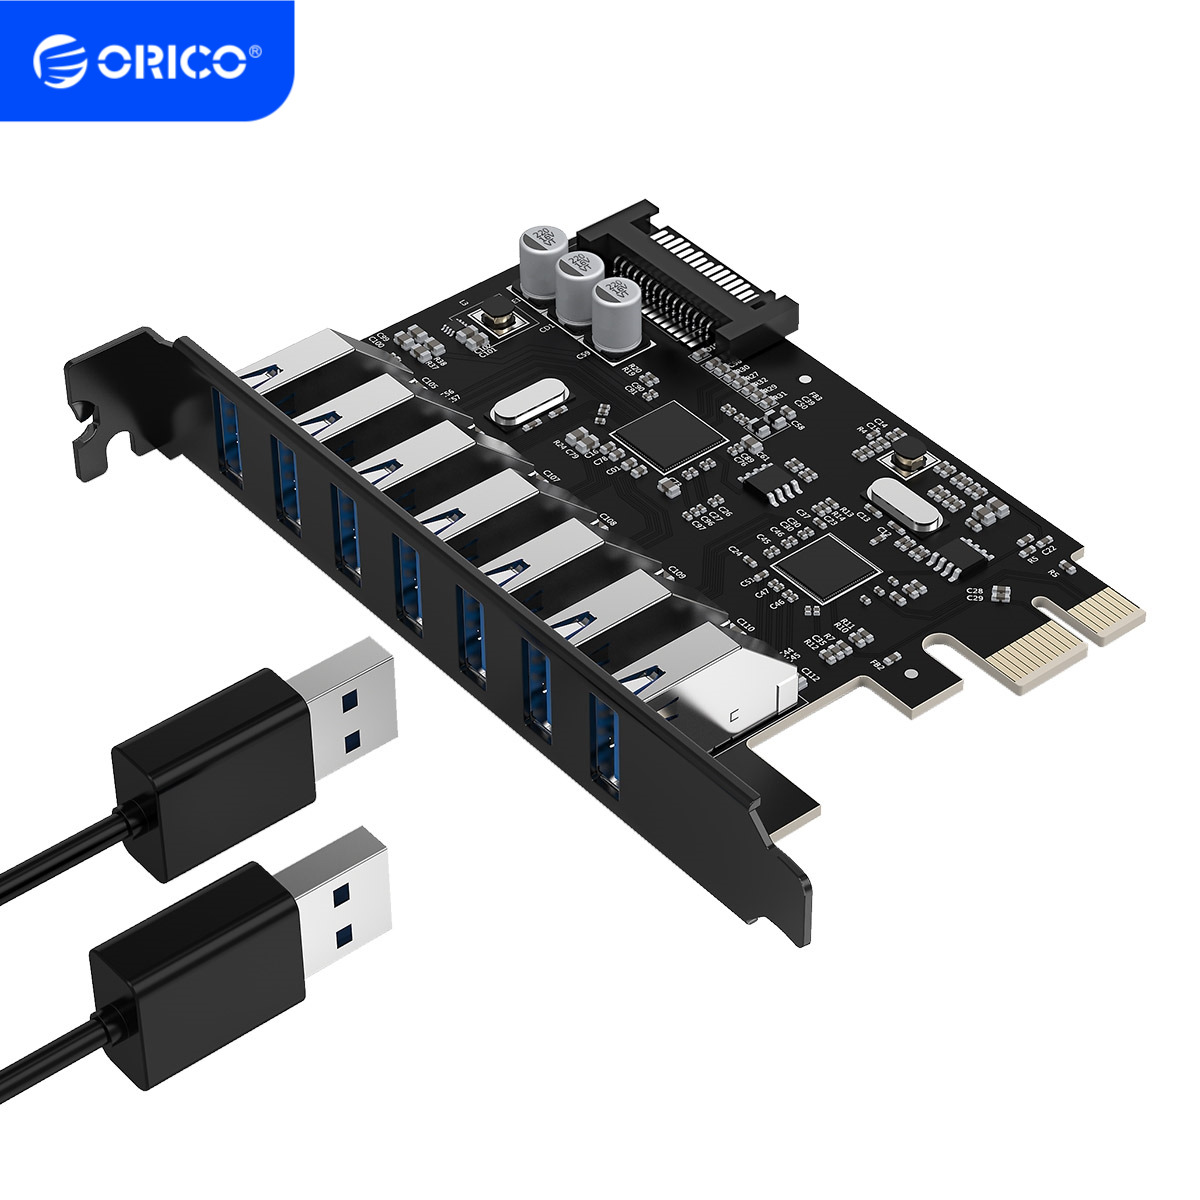 ORICO USB3.0 PCI-E Expansion Card Adapter 7Ports Hub Adapter External Controller